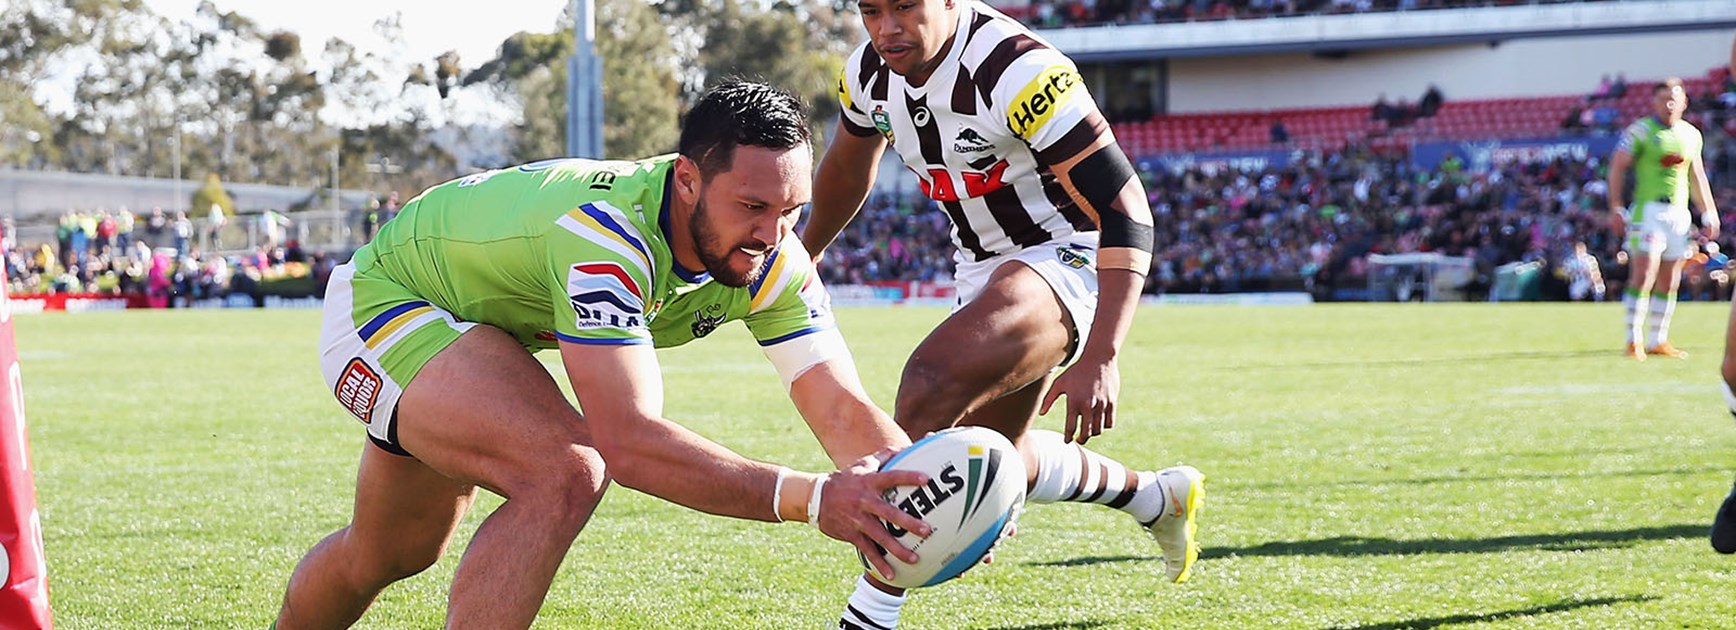 Raiders winger Jordan Rapana scored two tries against Penrith in Round 20 of the Telstra Premiership.